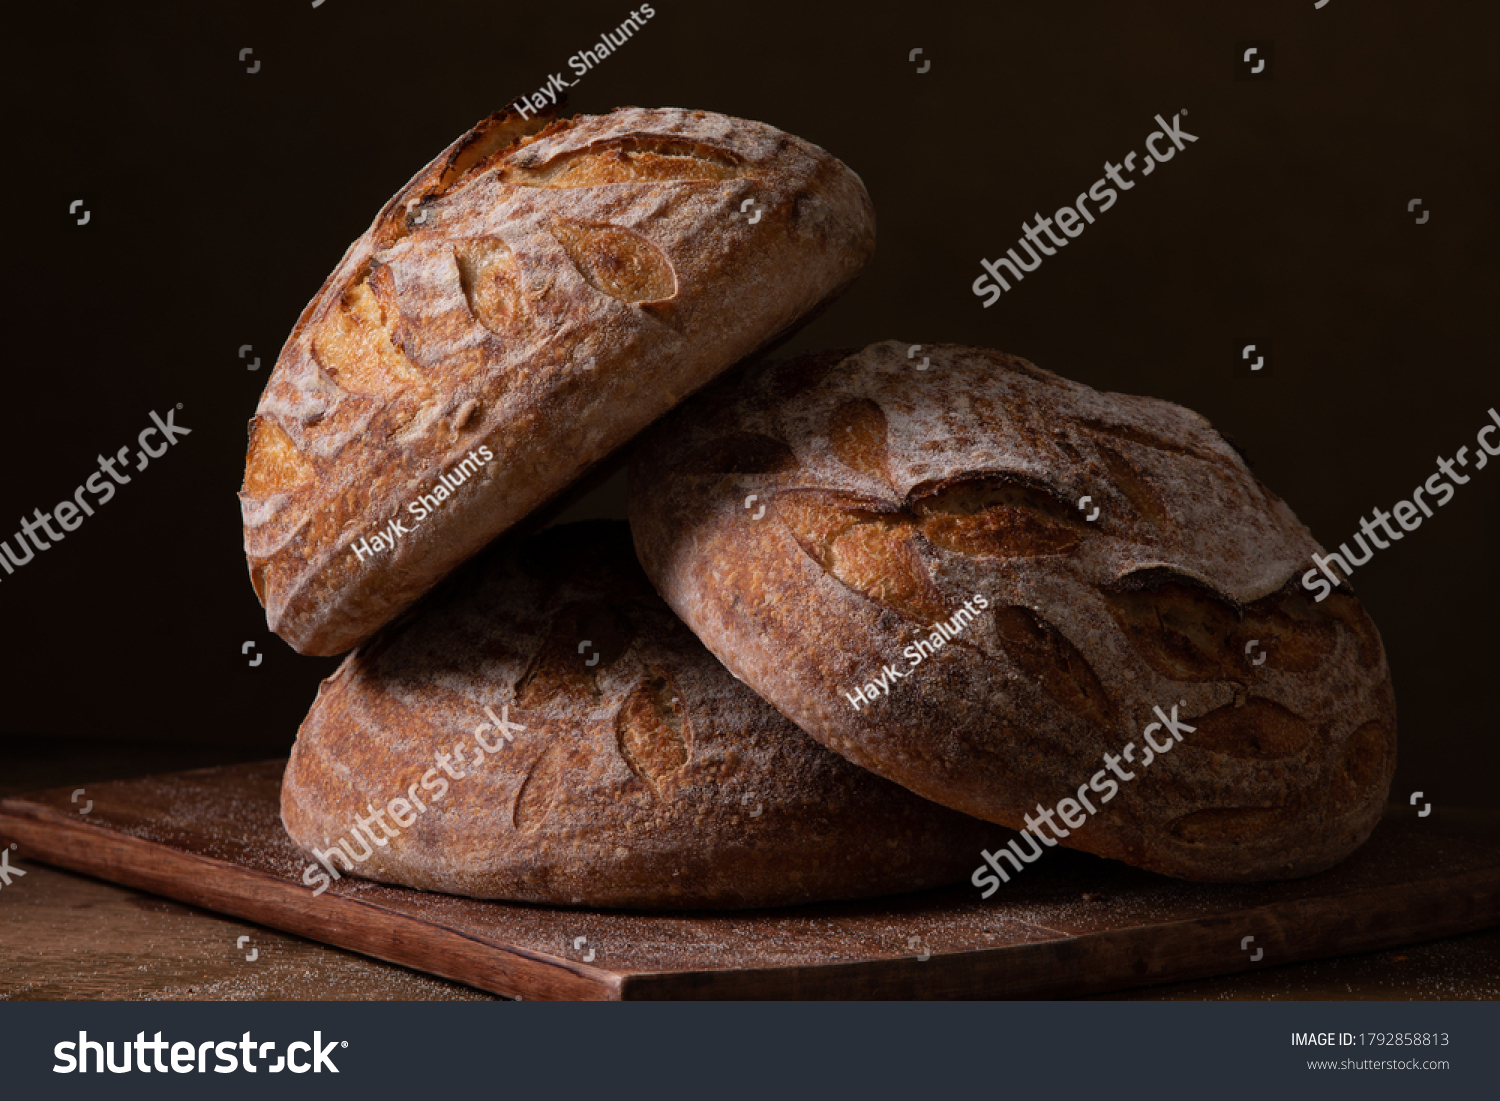 Freshly baked sourdough bread with floral decoration on it  #1792858813